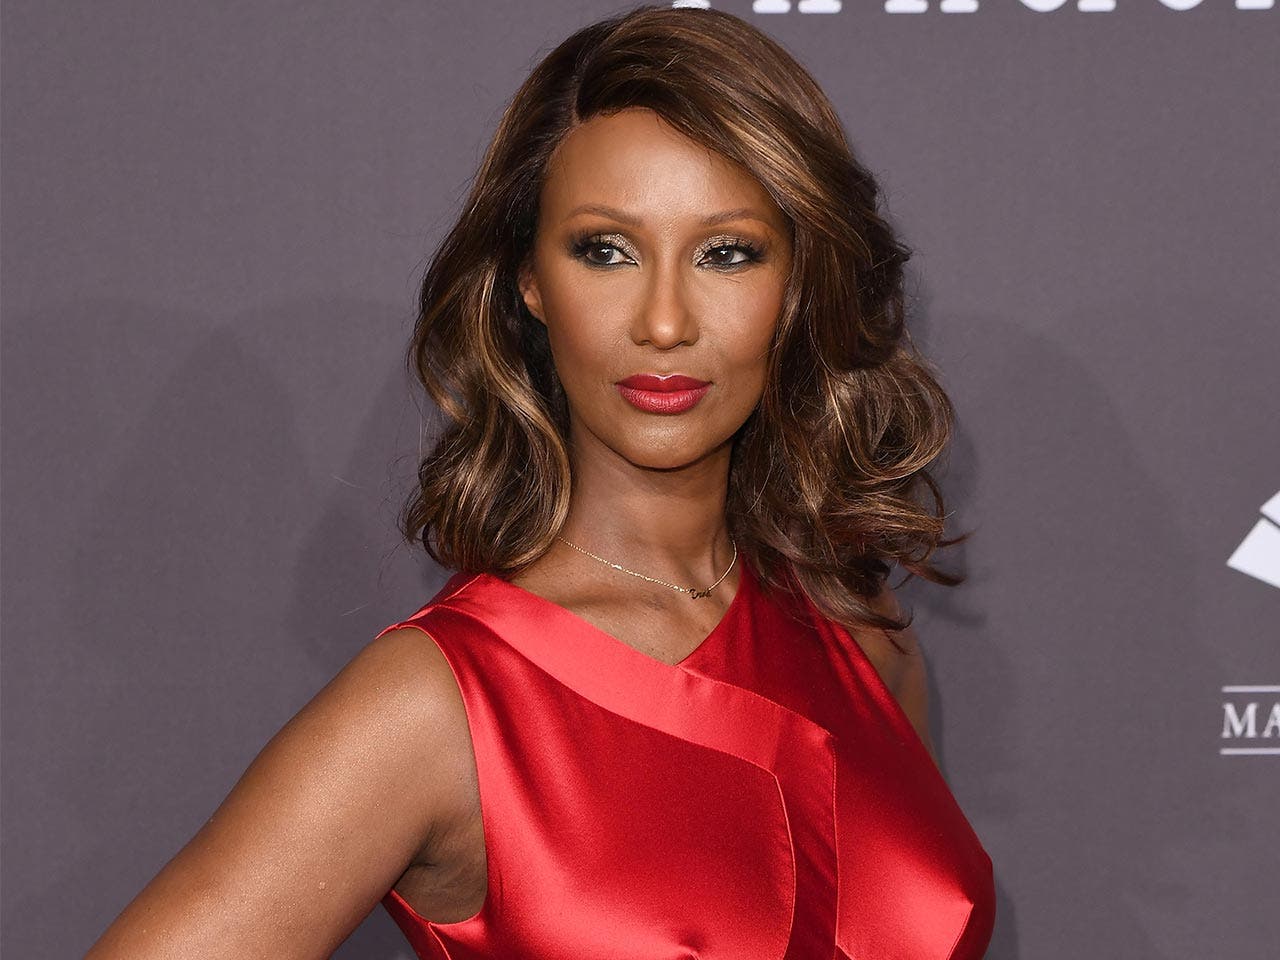 11 Of The World’s Richest Supermodels